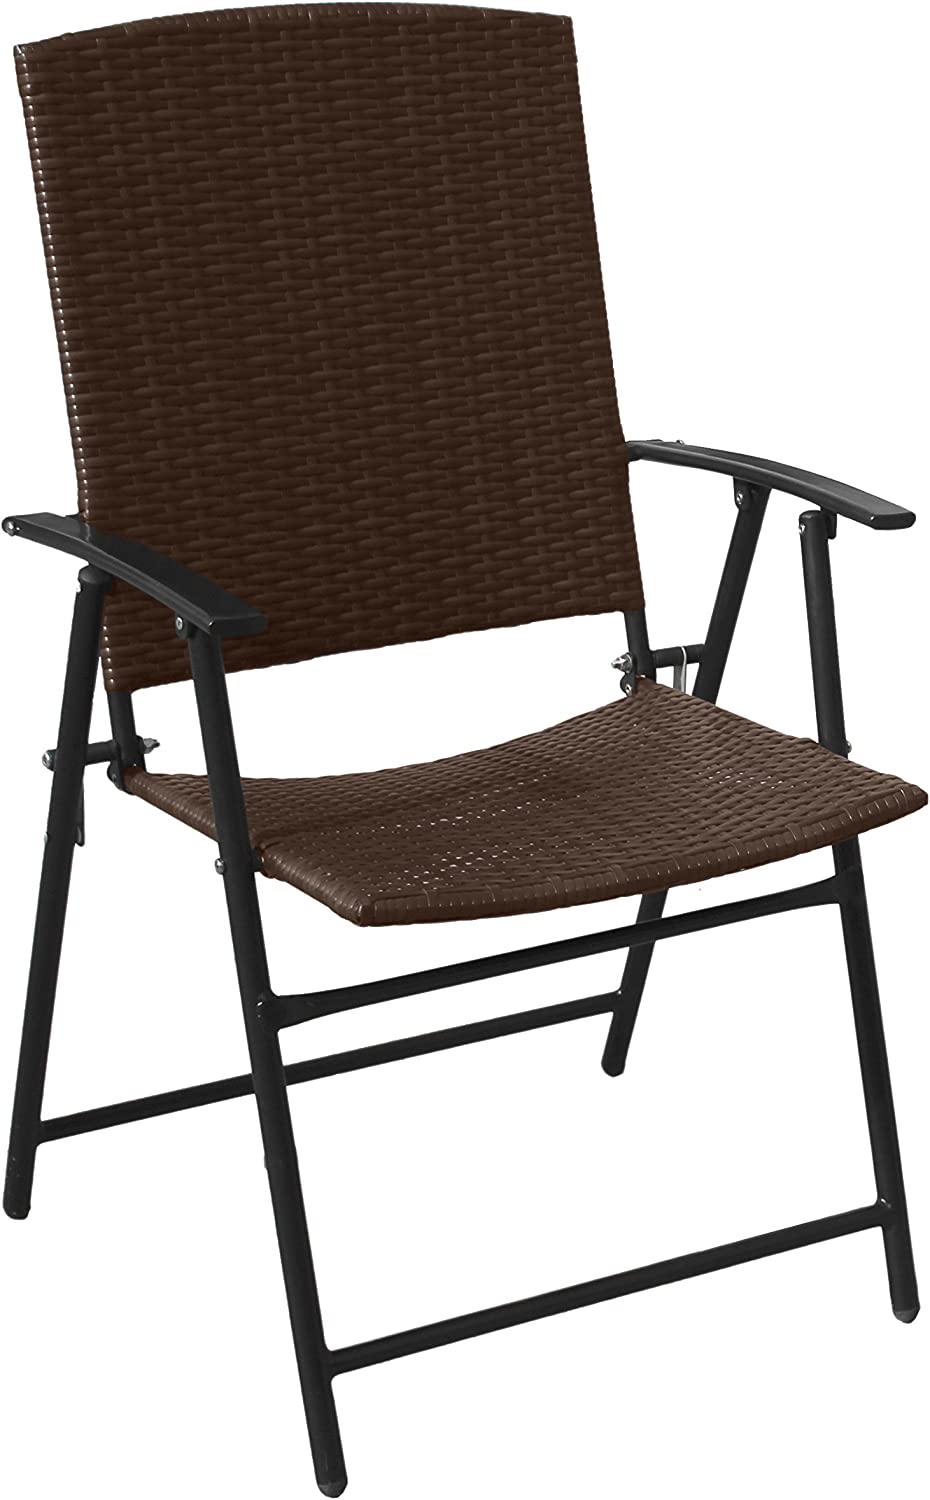 Hiland AW-085 3 Piece Woven Resin Wiker Outdoor Furniture Chair and Table Set, Dark Brown